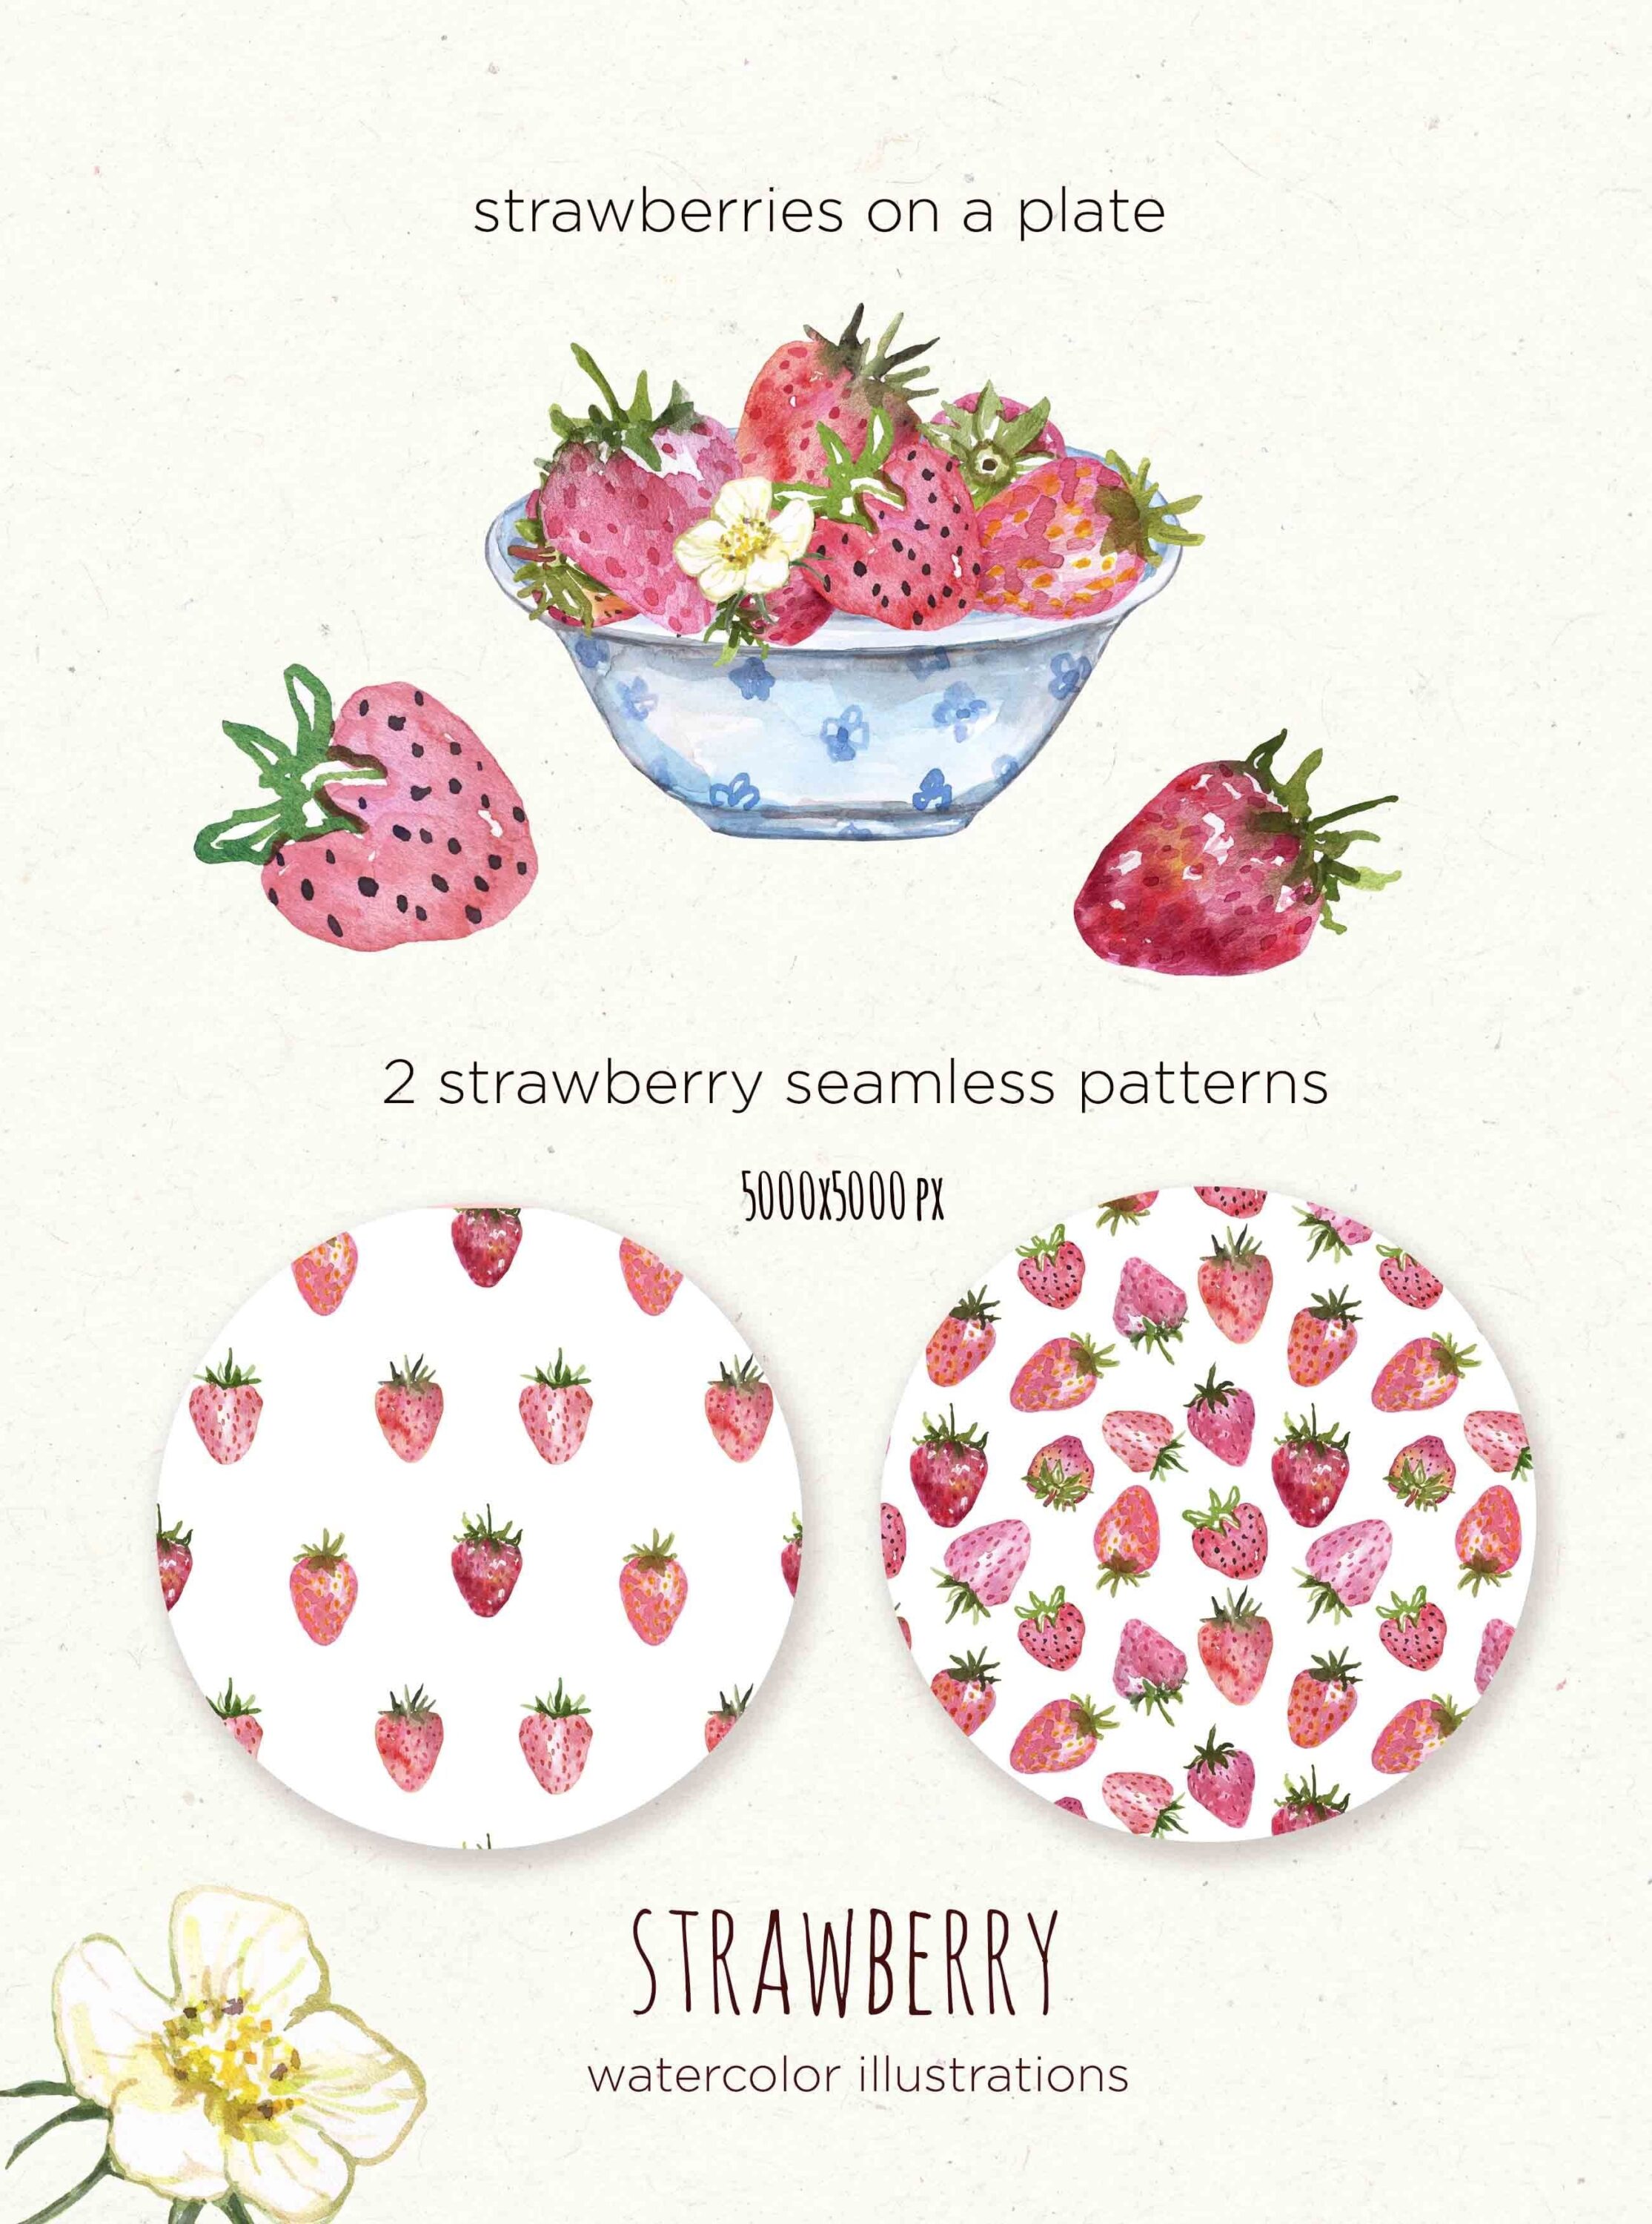 Two patterns with the image of strawberries.